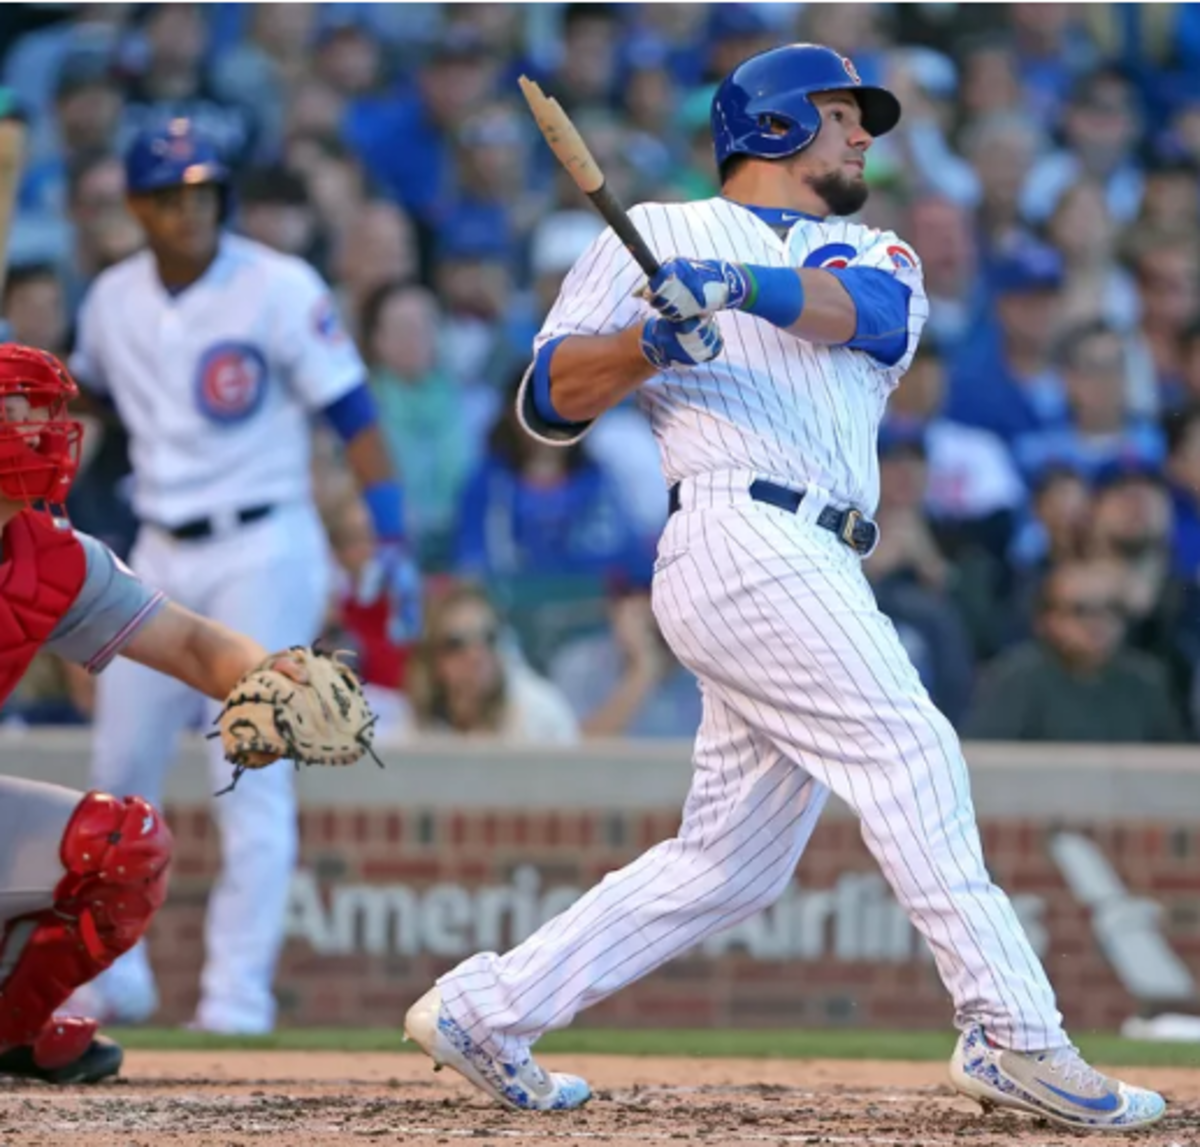 Kyle  Schwarber was the best hitter in the lineup the second half of last season and is still in the arbitration phase of his contract, making him very valuable to the Cubs' roster.Photo: Dennis Wierzbicki/USA TODAY Sports